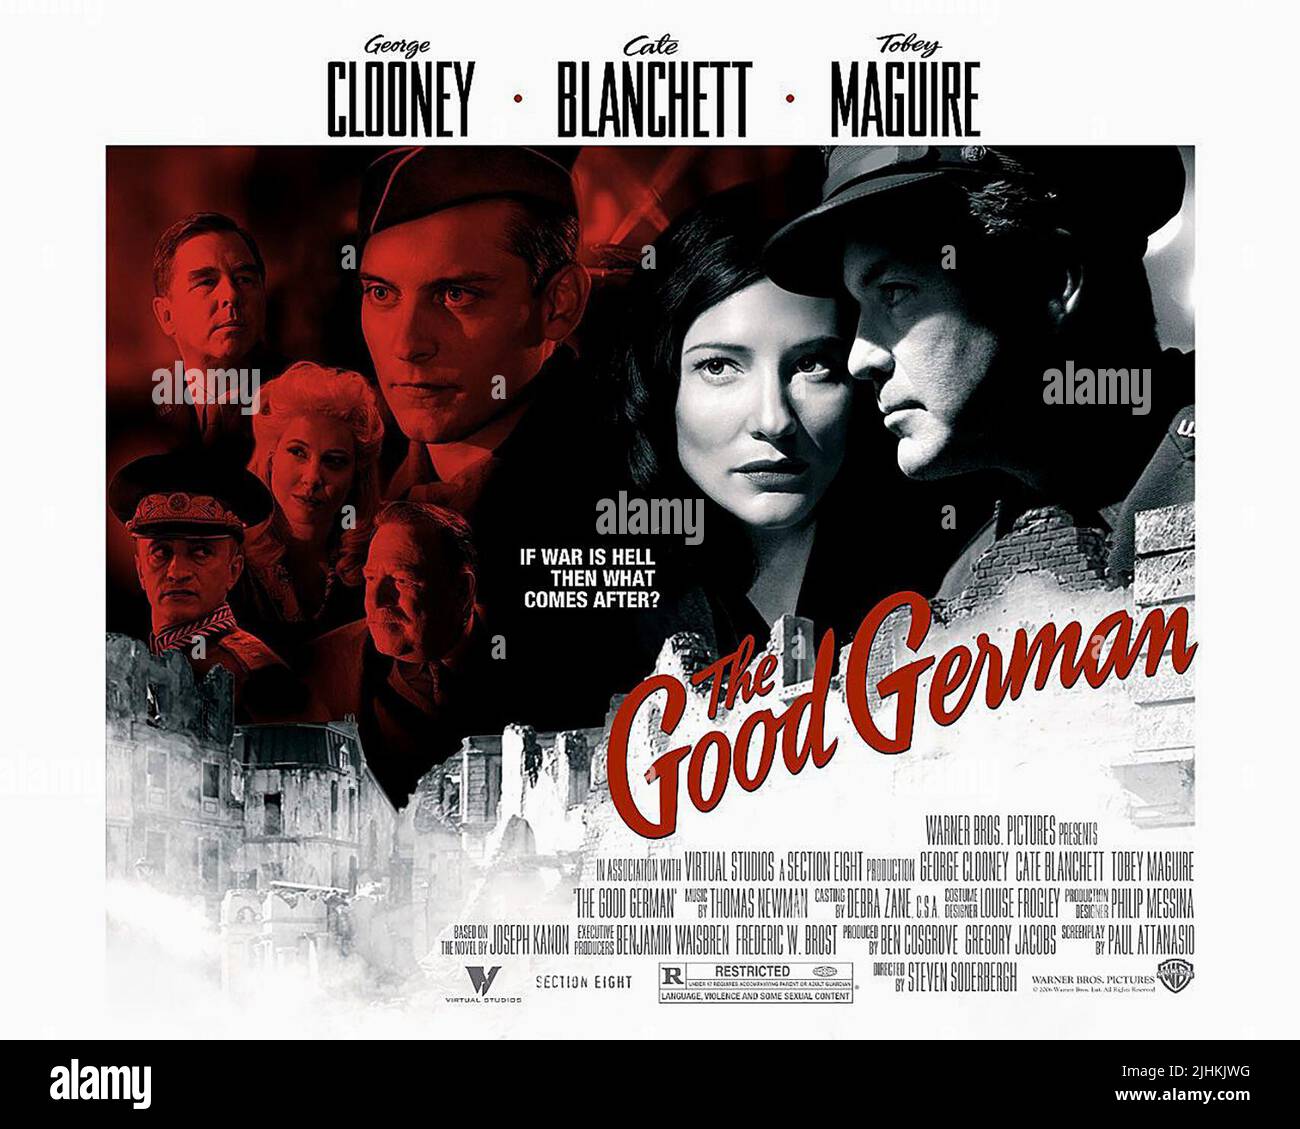 TOBEY MAGUIRE, CATE BLANCHETT, GEORGE CLOONEY POSTER, THE GOOD GERMAN, 2006 Stock Photo